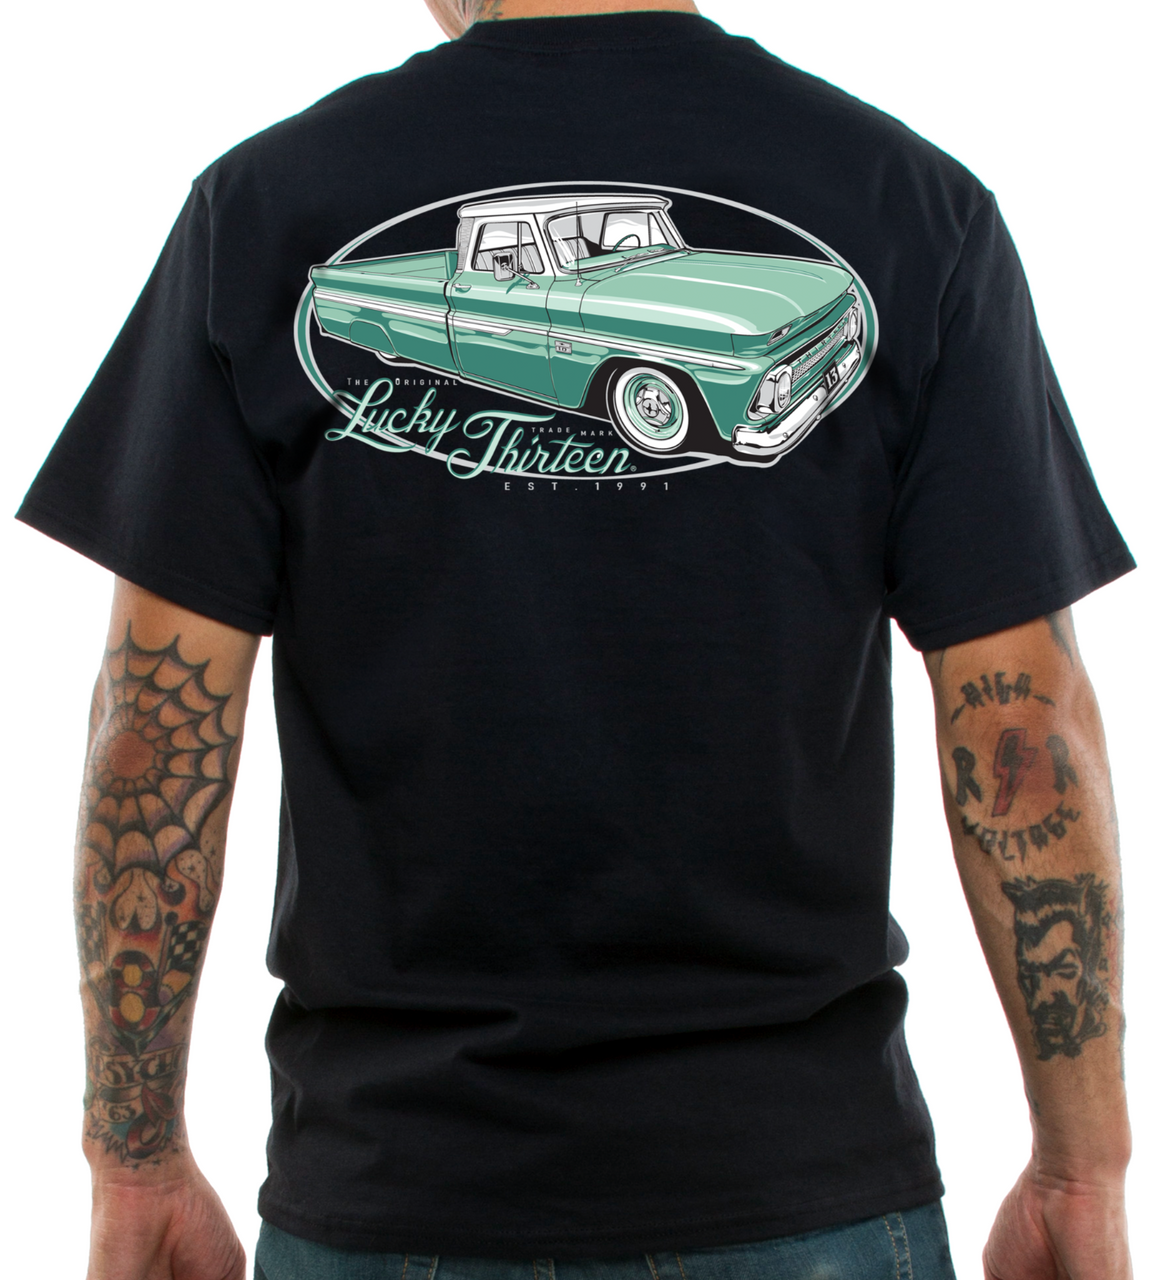 Chevy Truck and Landscape themed shoulder tattoo created by Jarris  Vonzombie  Truck tattoo Shoulder tattoo Tattoo work